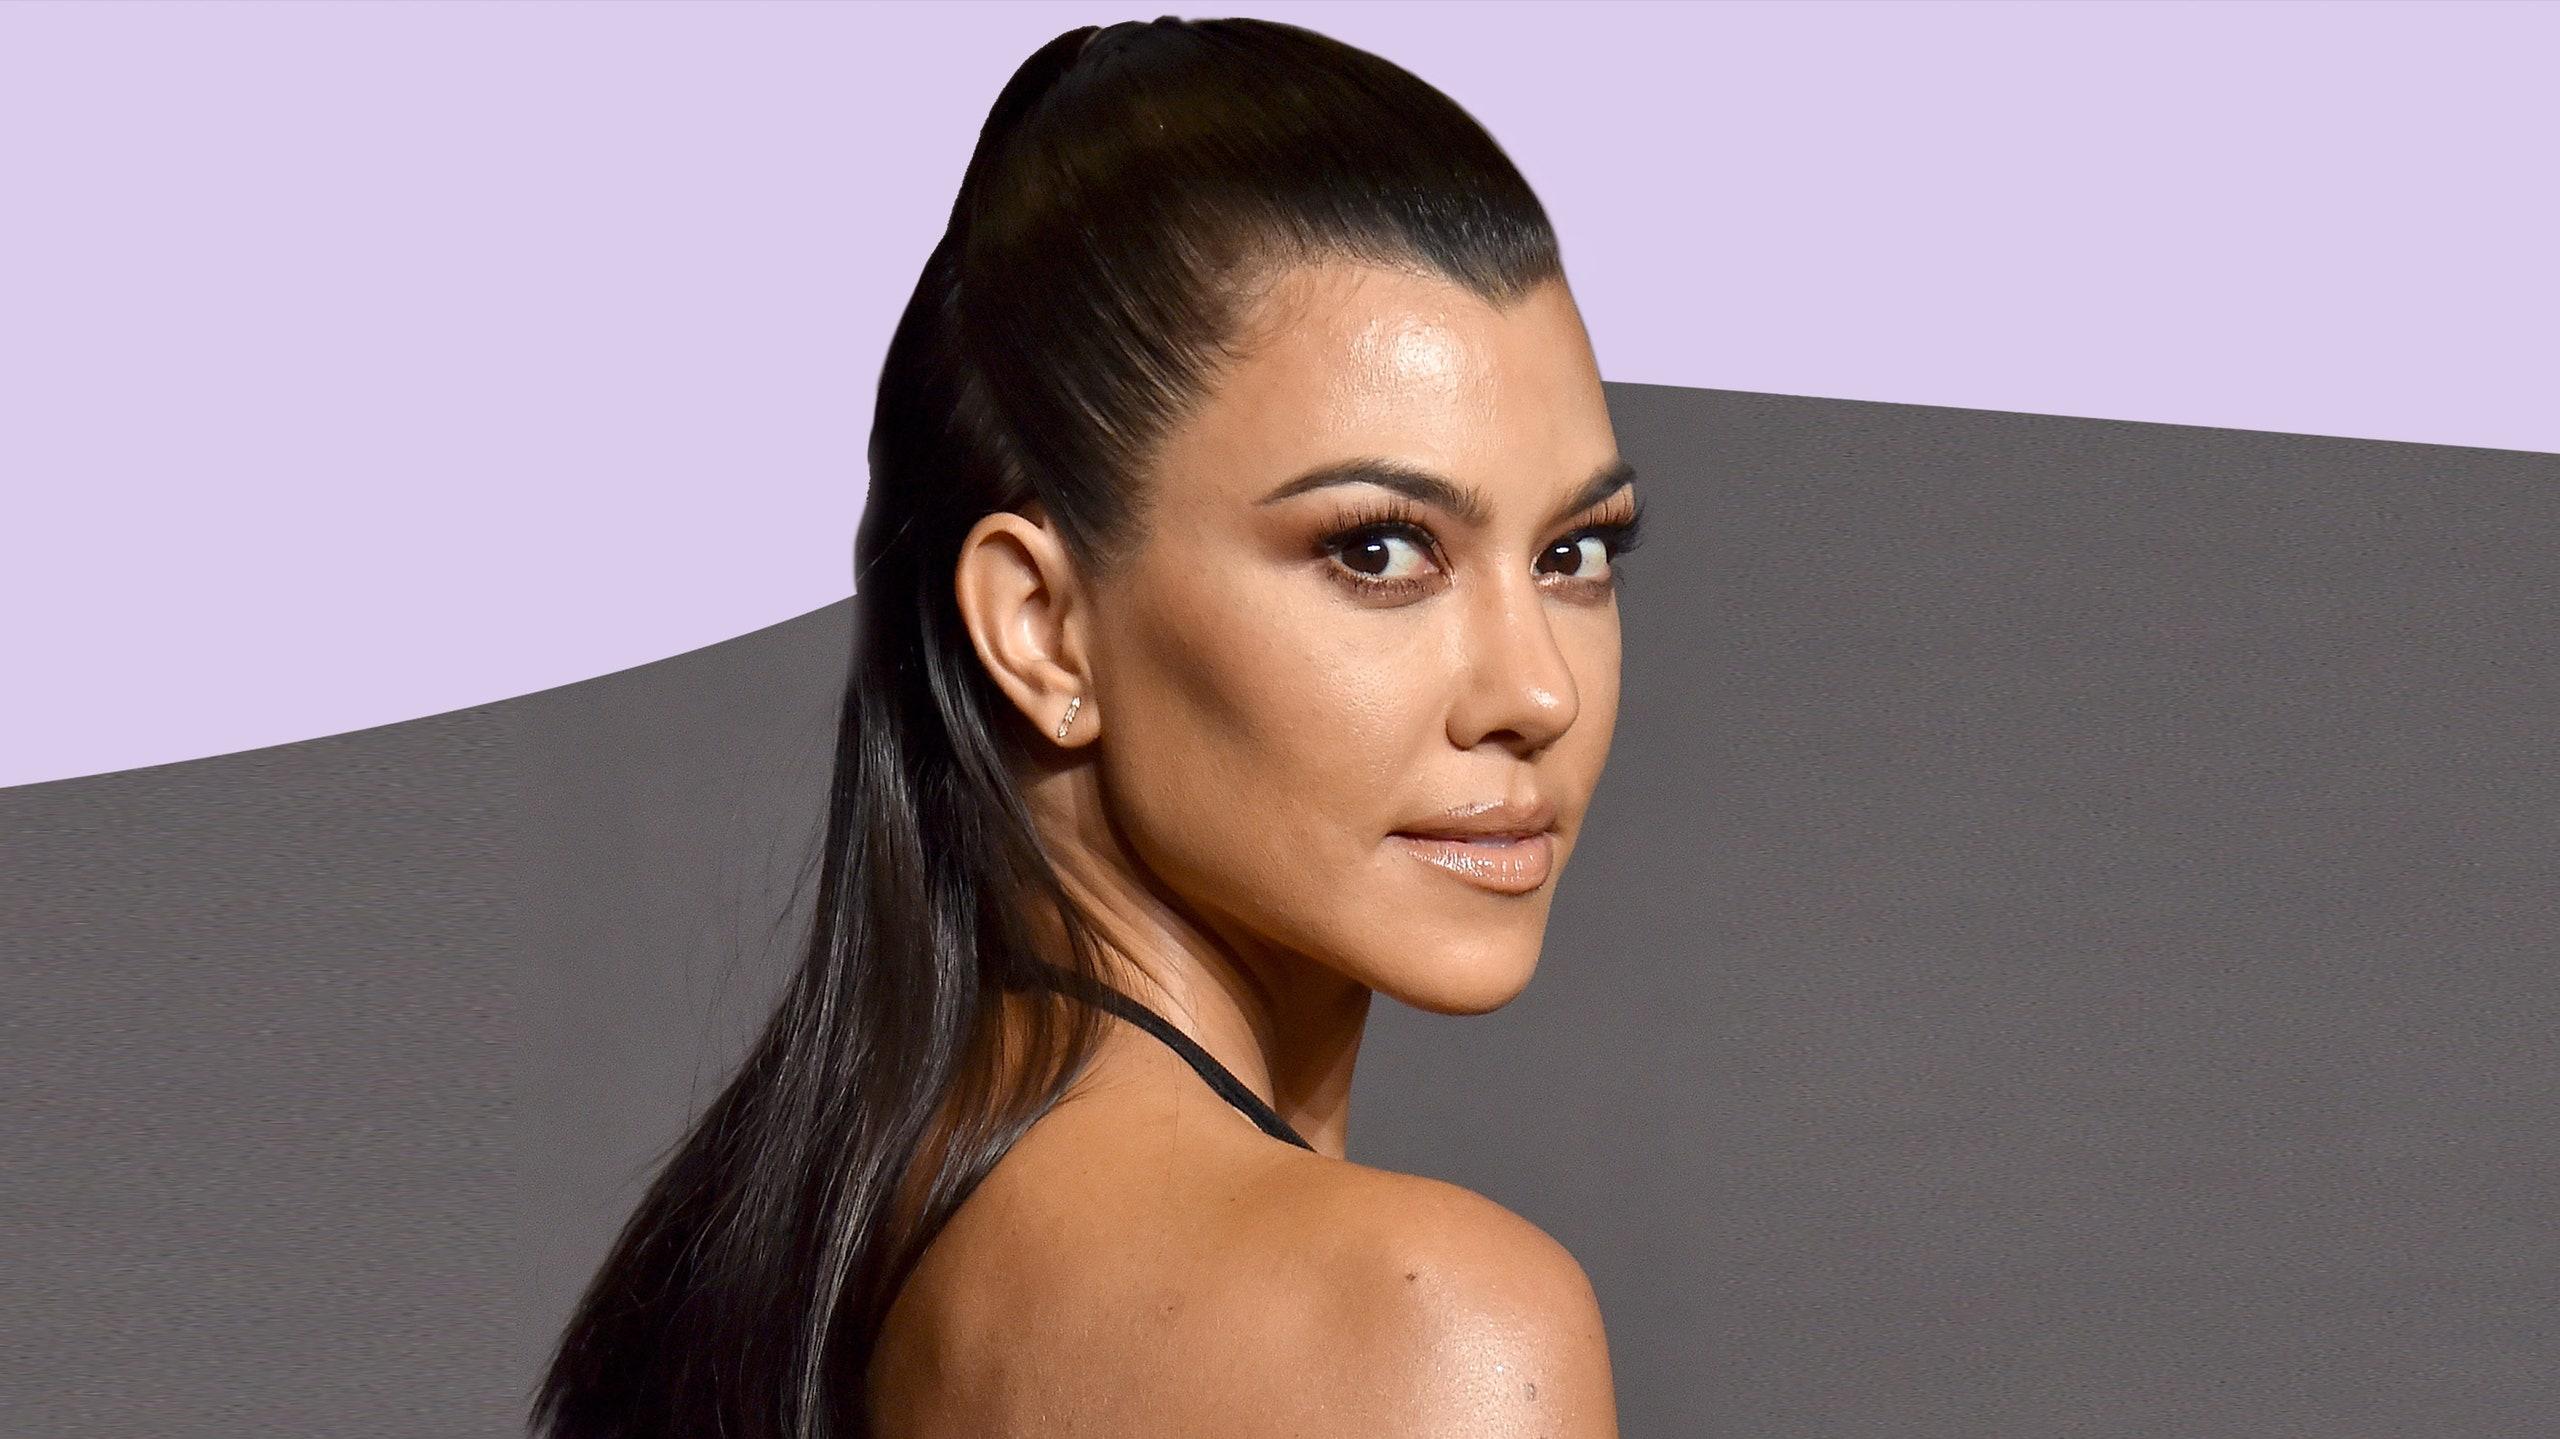 Kourtney Kardashian Calls Out Paparazzi For Selling Pictures Amid